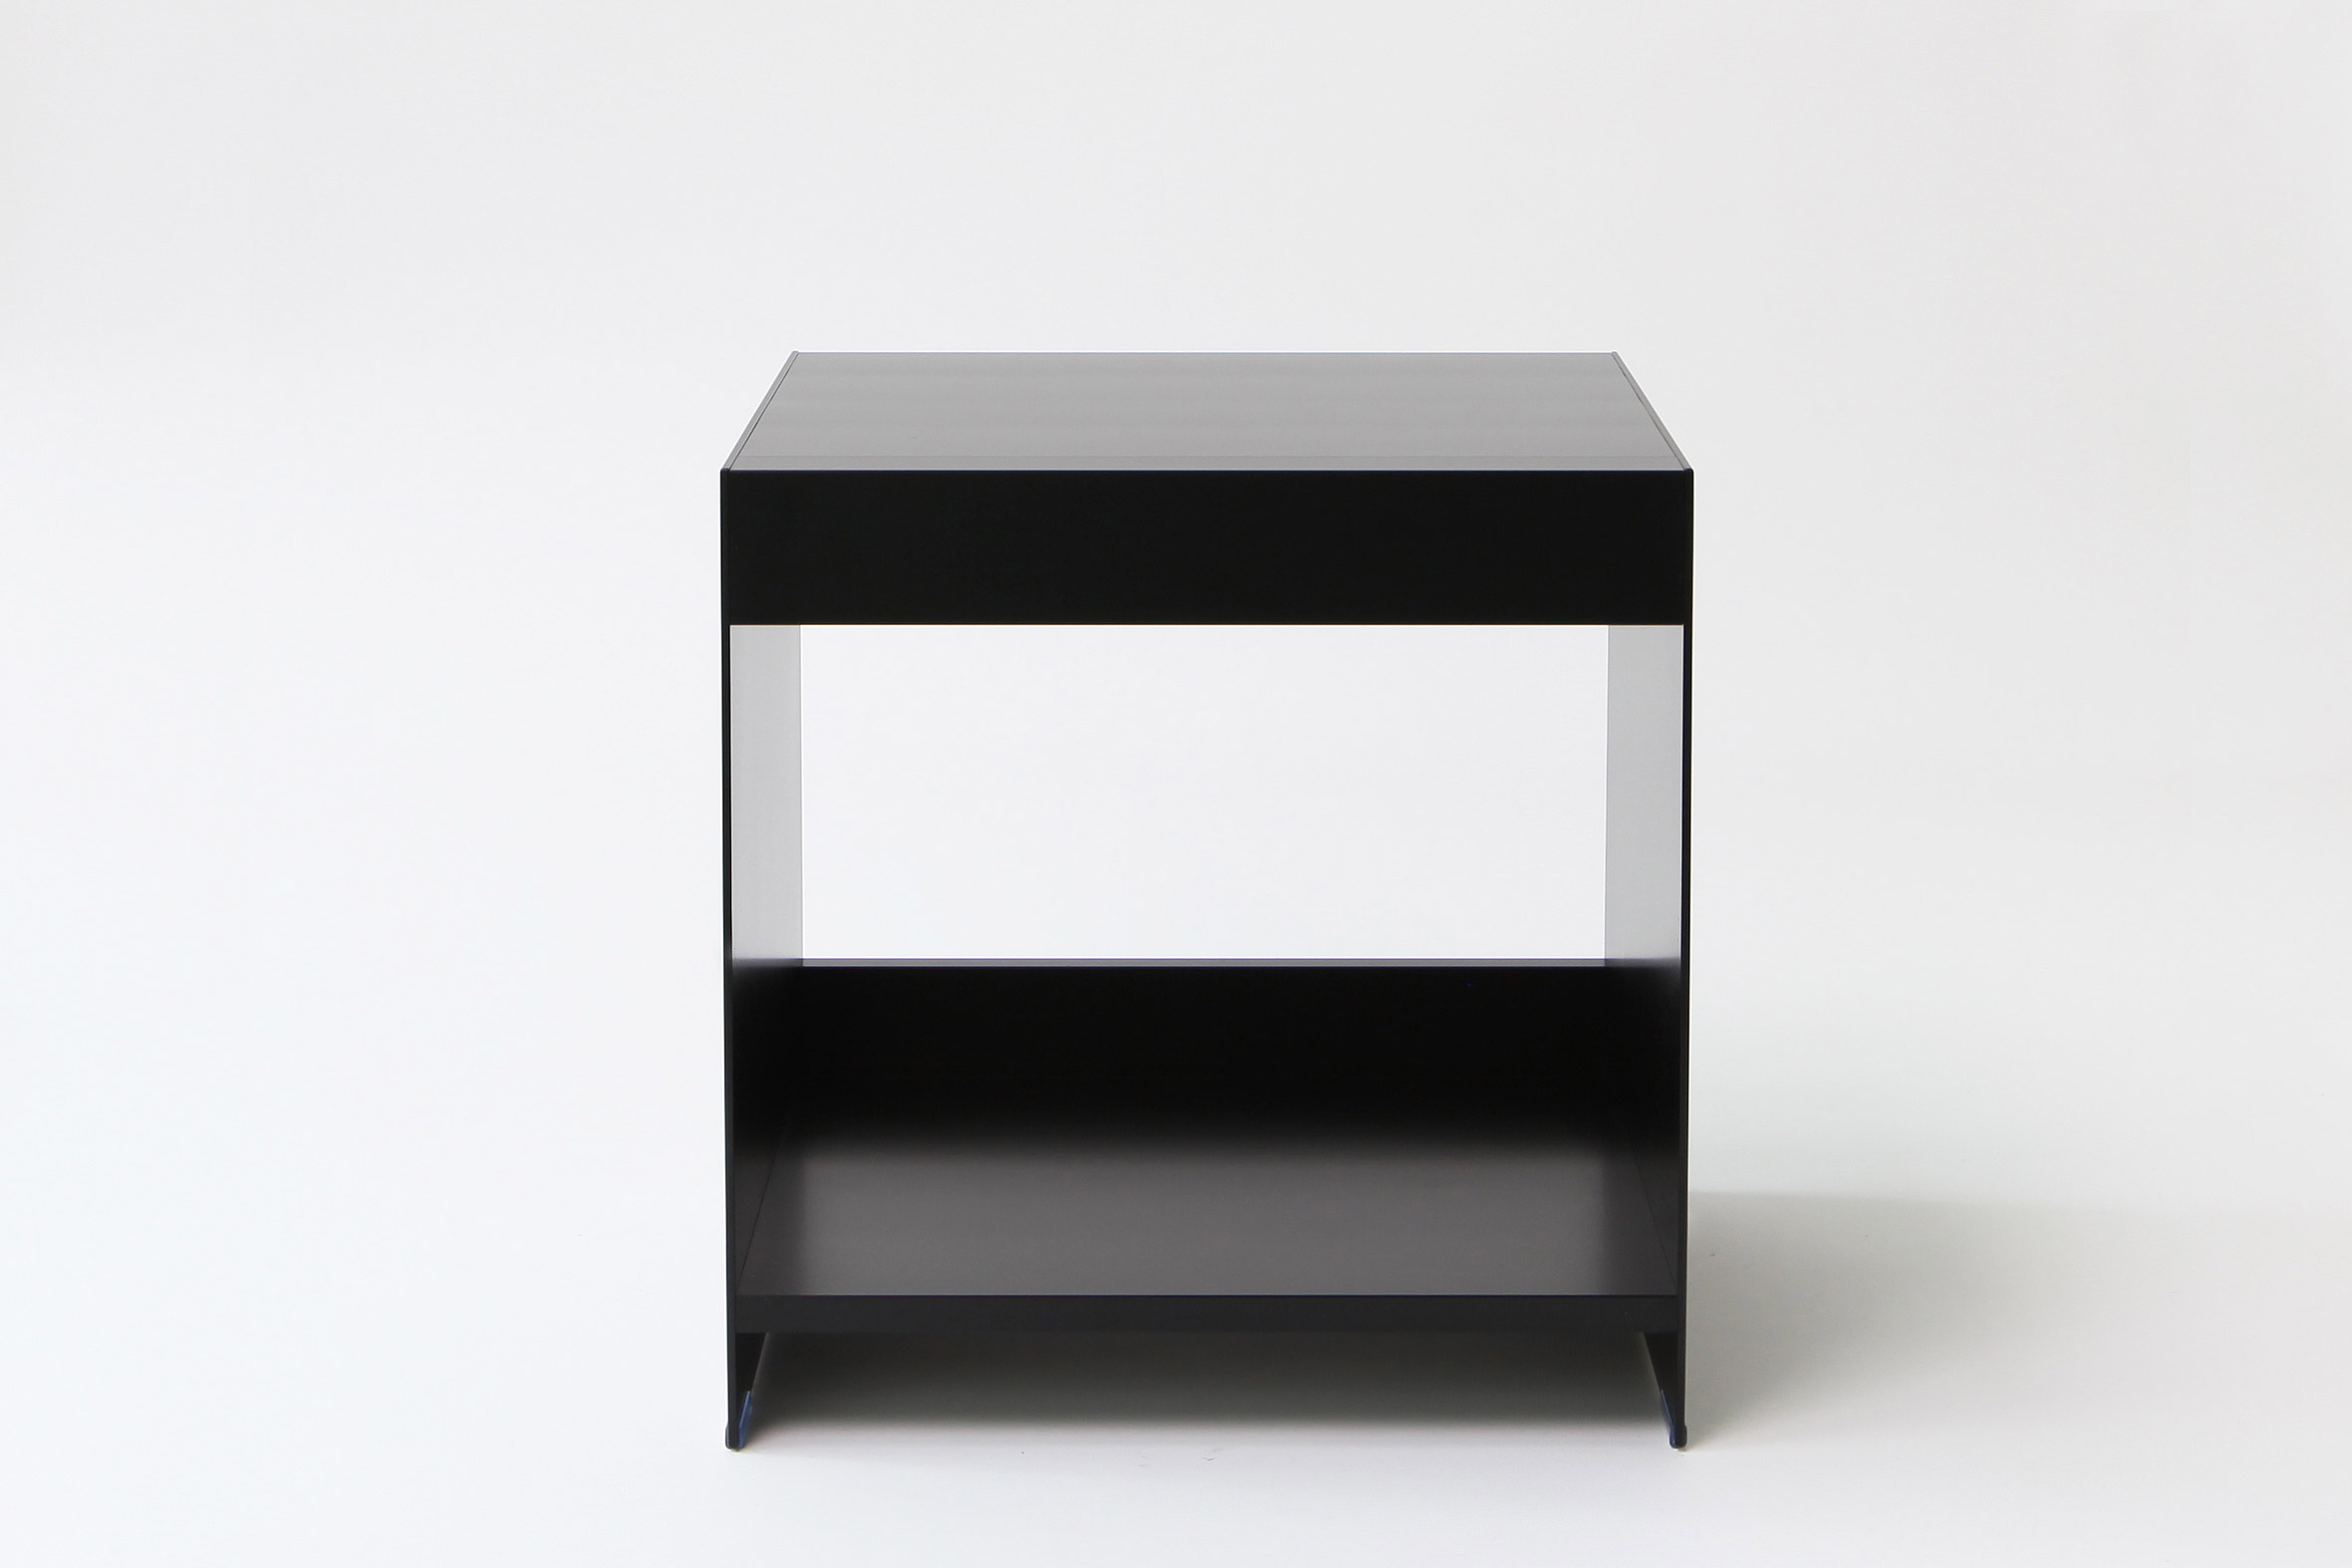 Small side table from ON&ON's freestanding shelving system